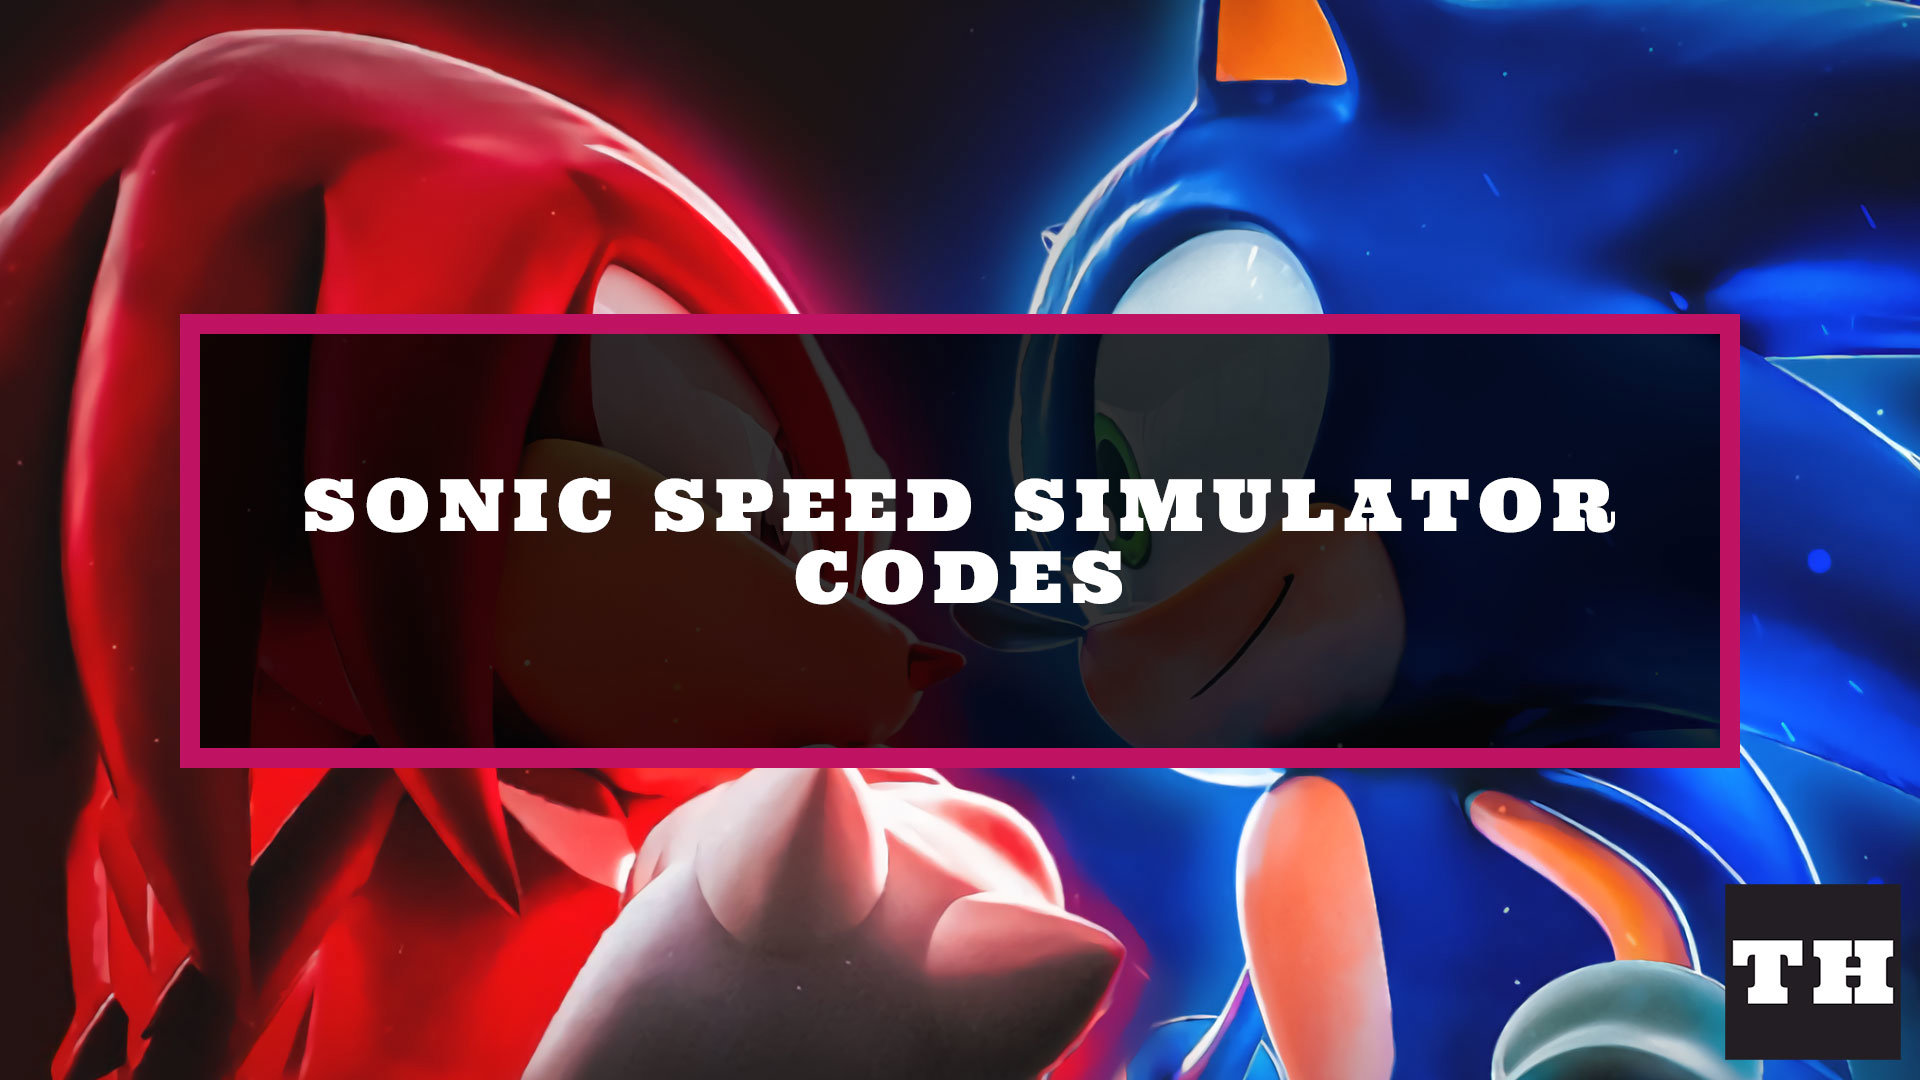 new-all-working-codes-for-sonic-speed-simulator-in-2022-roblox-sonic-speed-simulator-codes